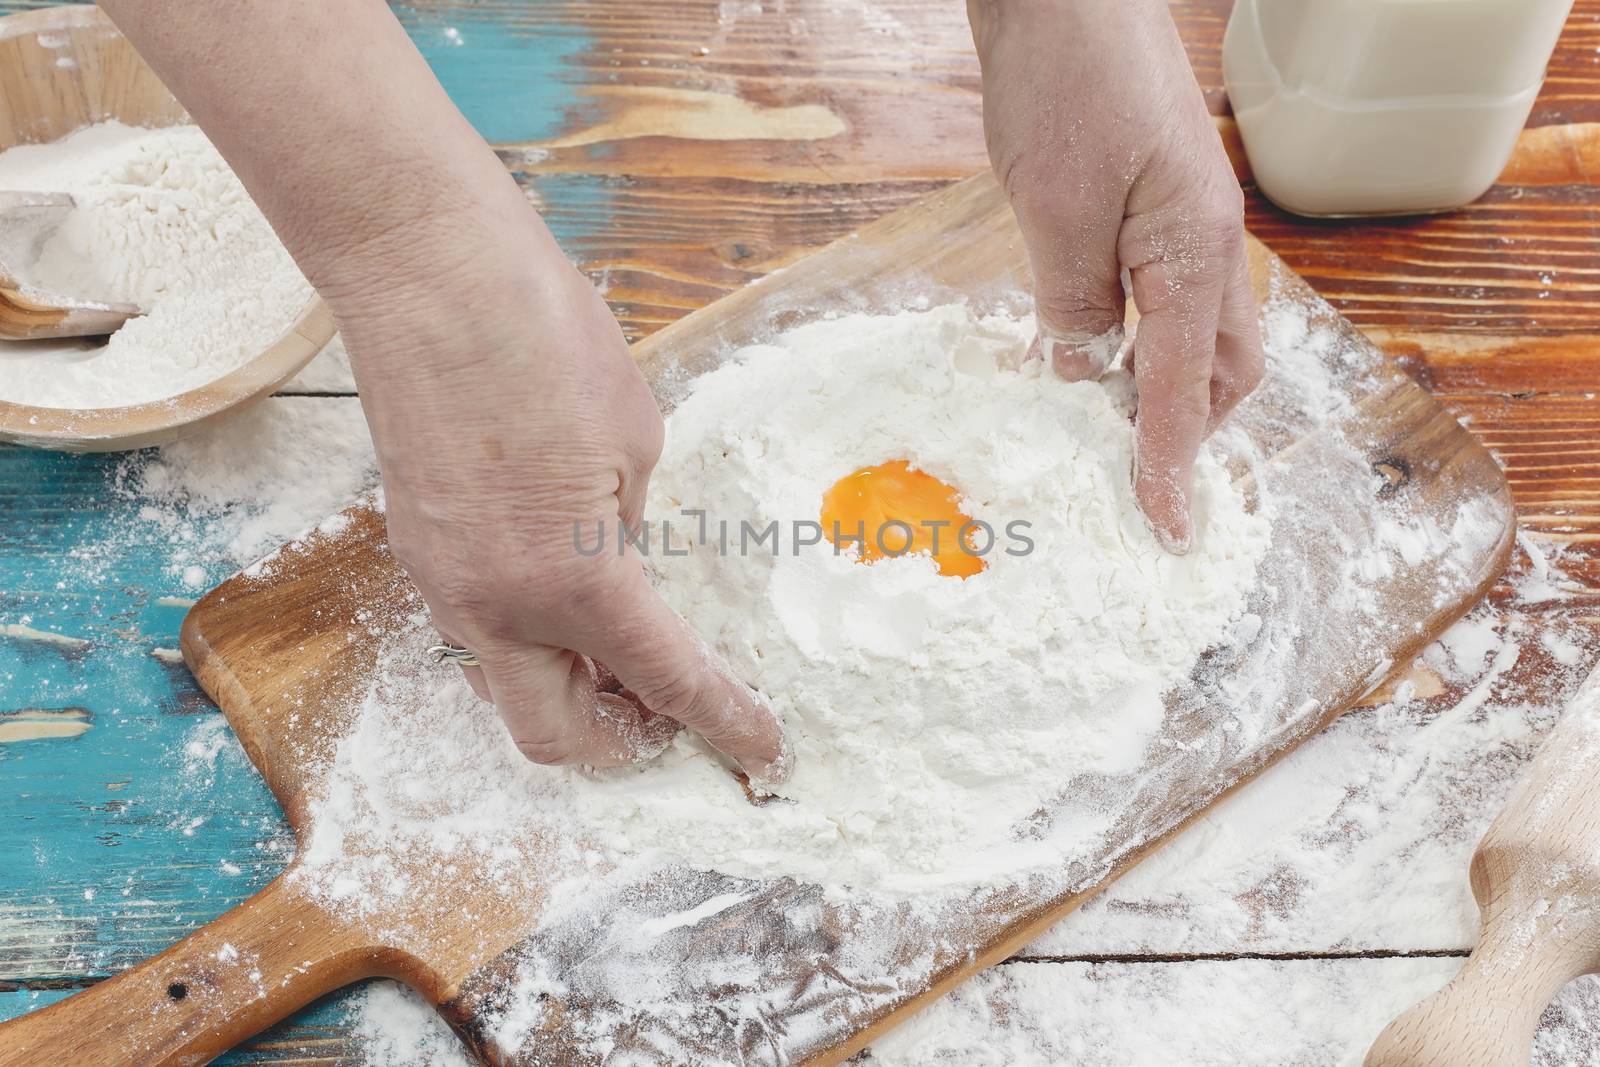 Hands kneading dough on board - flour and eggs